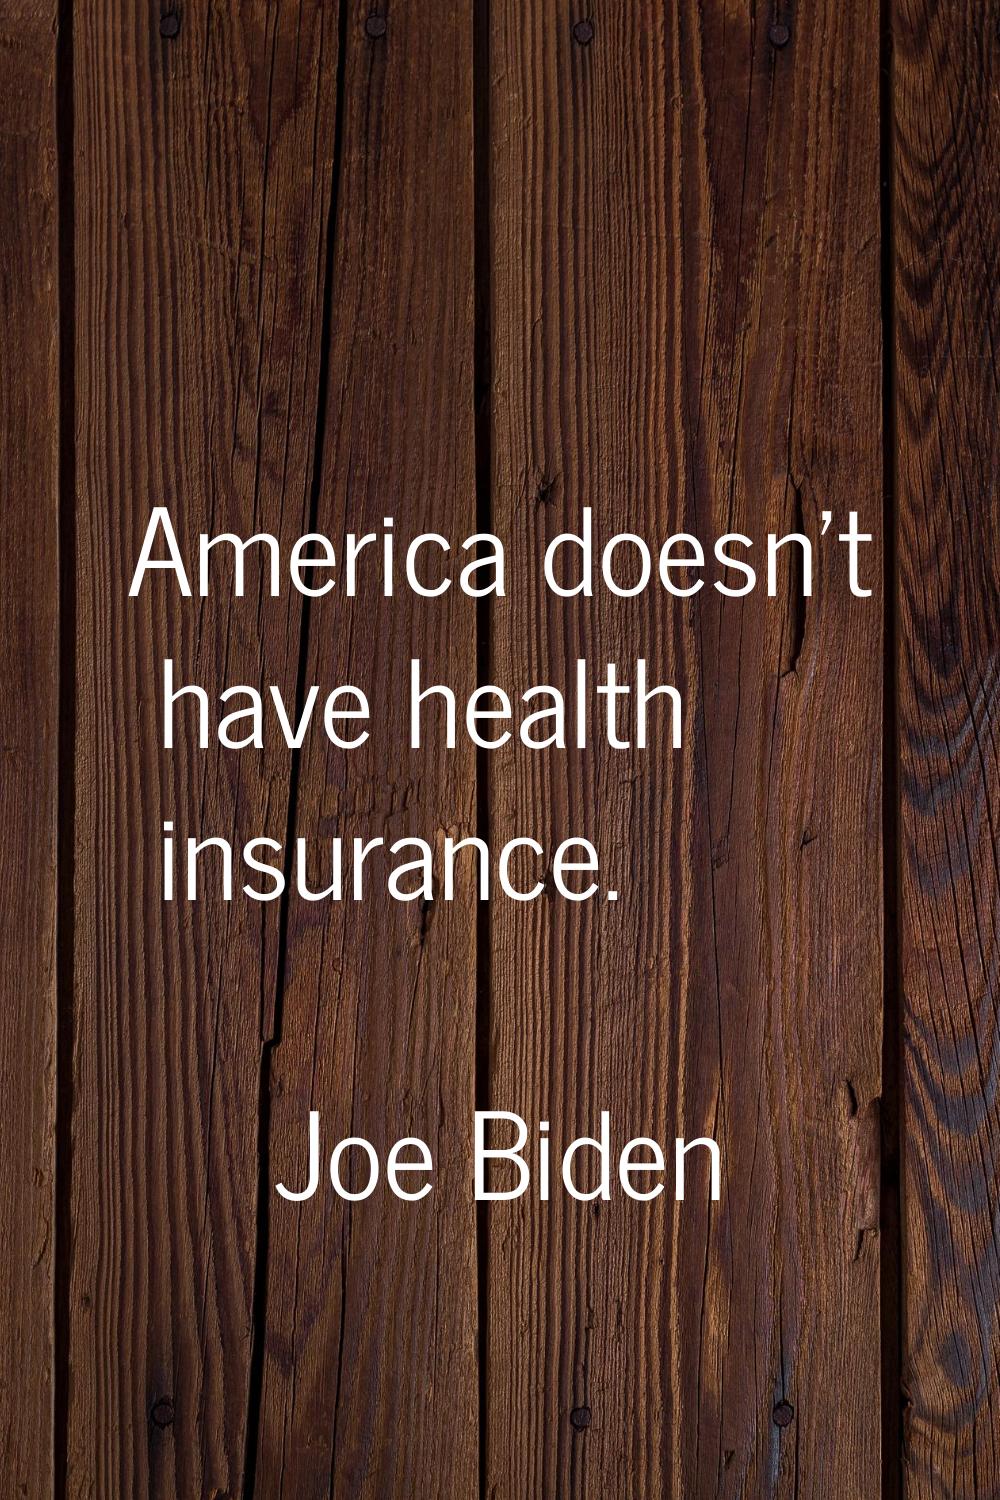 America doesn't have health insurance.